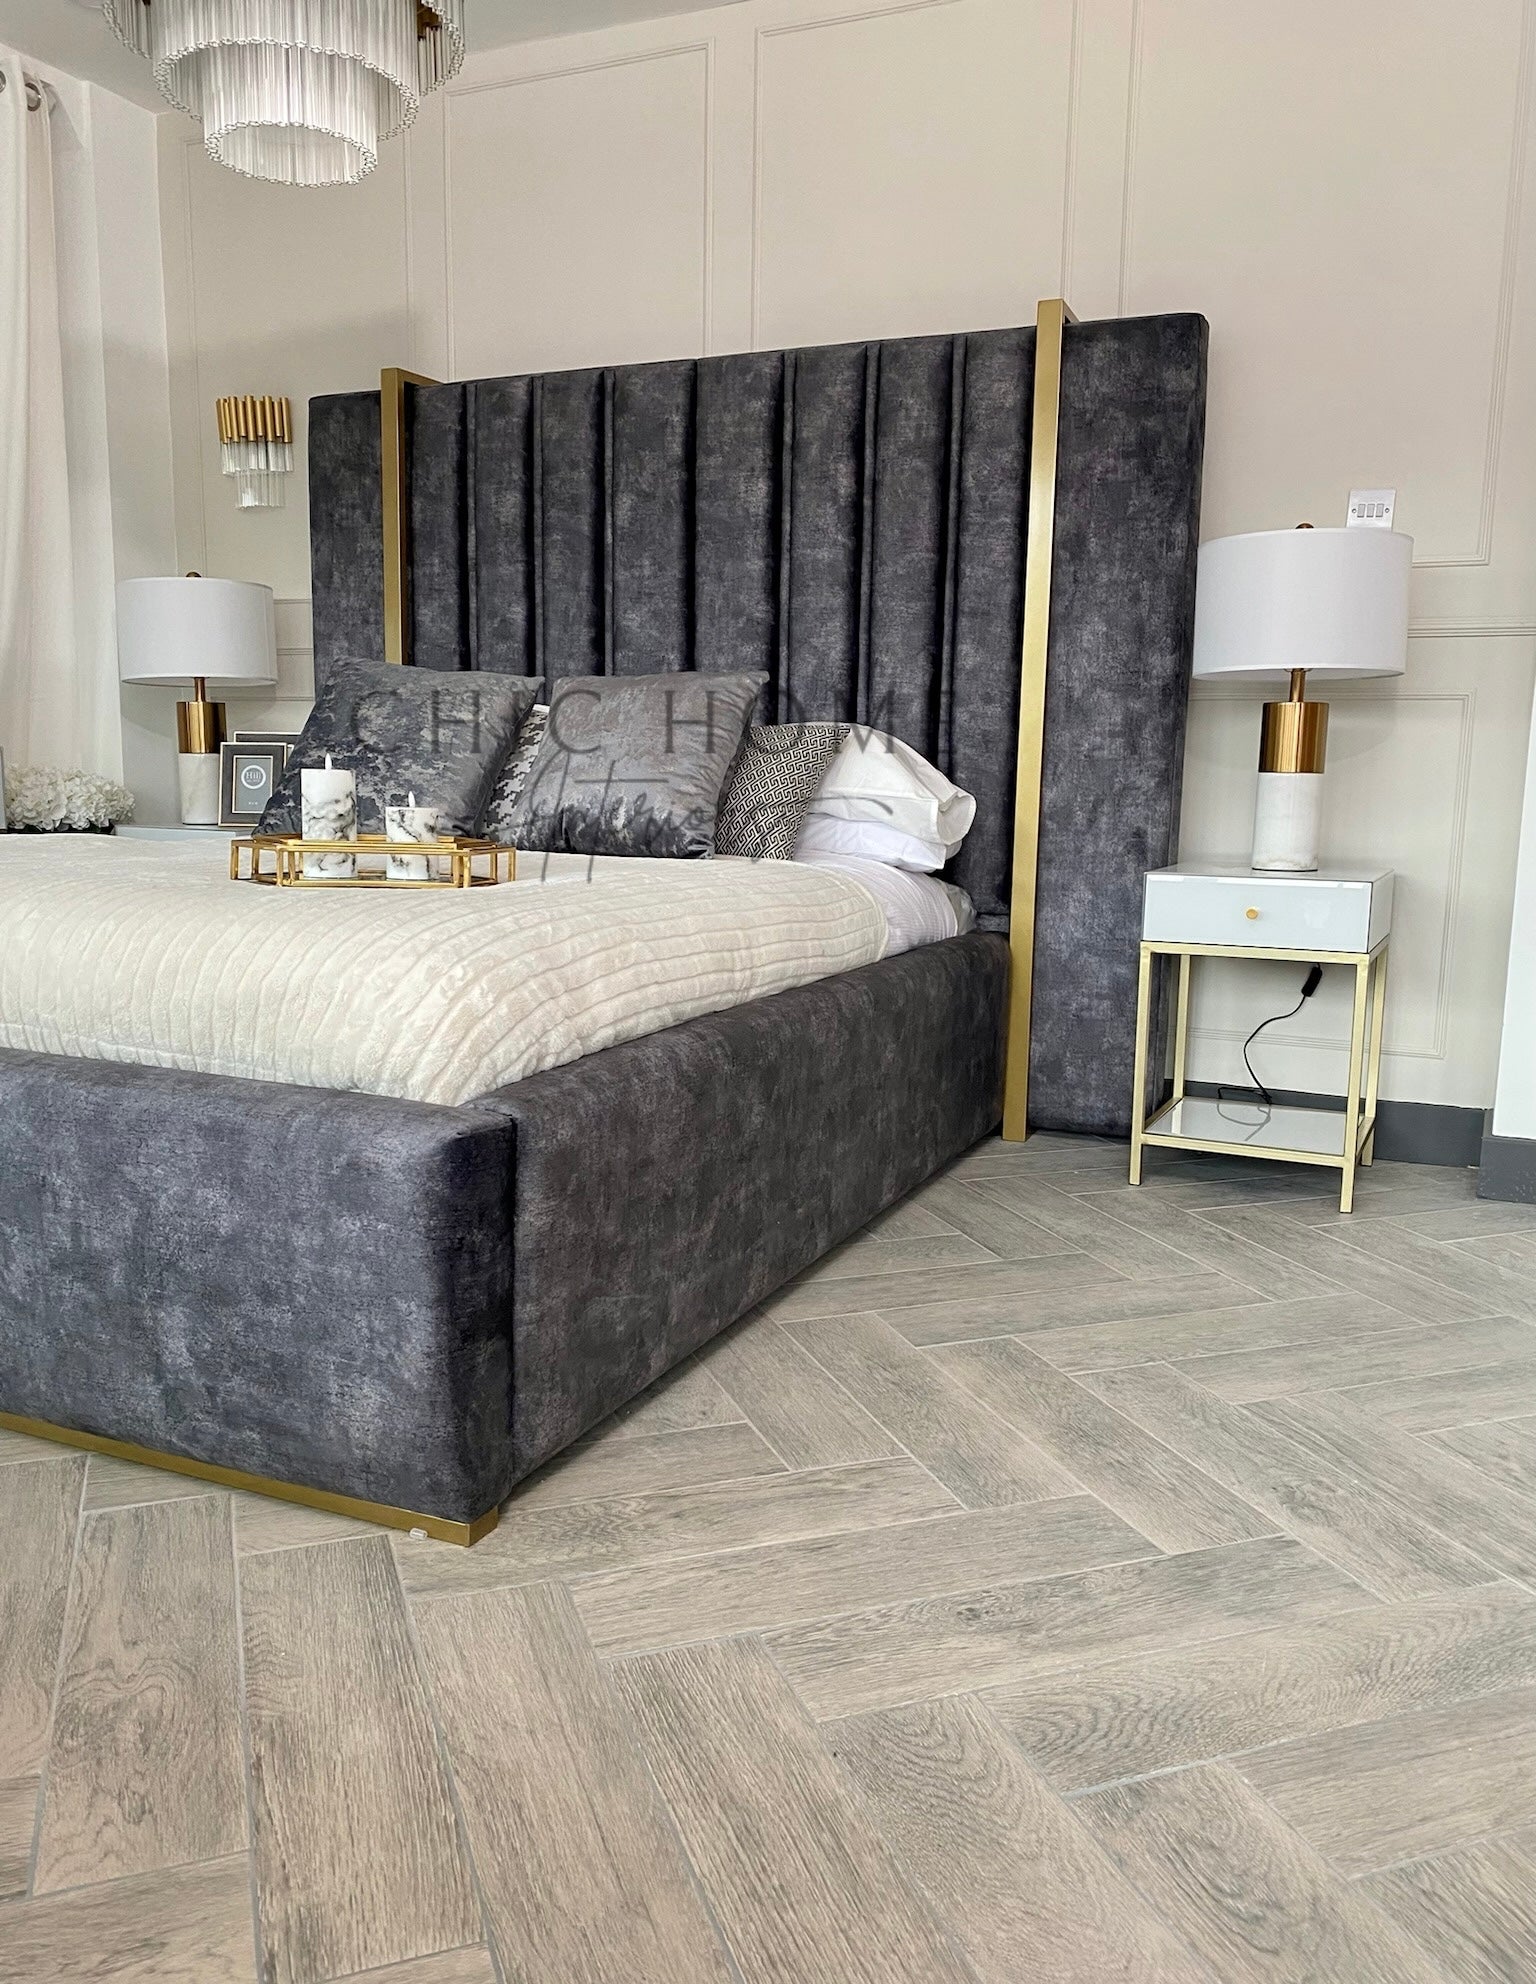 The Bespoke Royal Jade Bed- Fully Customisable with Storage Options- Luxe Metal Range